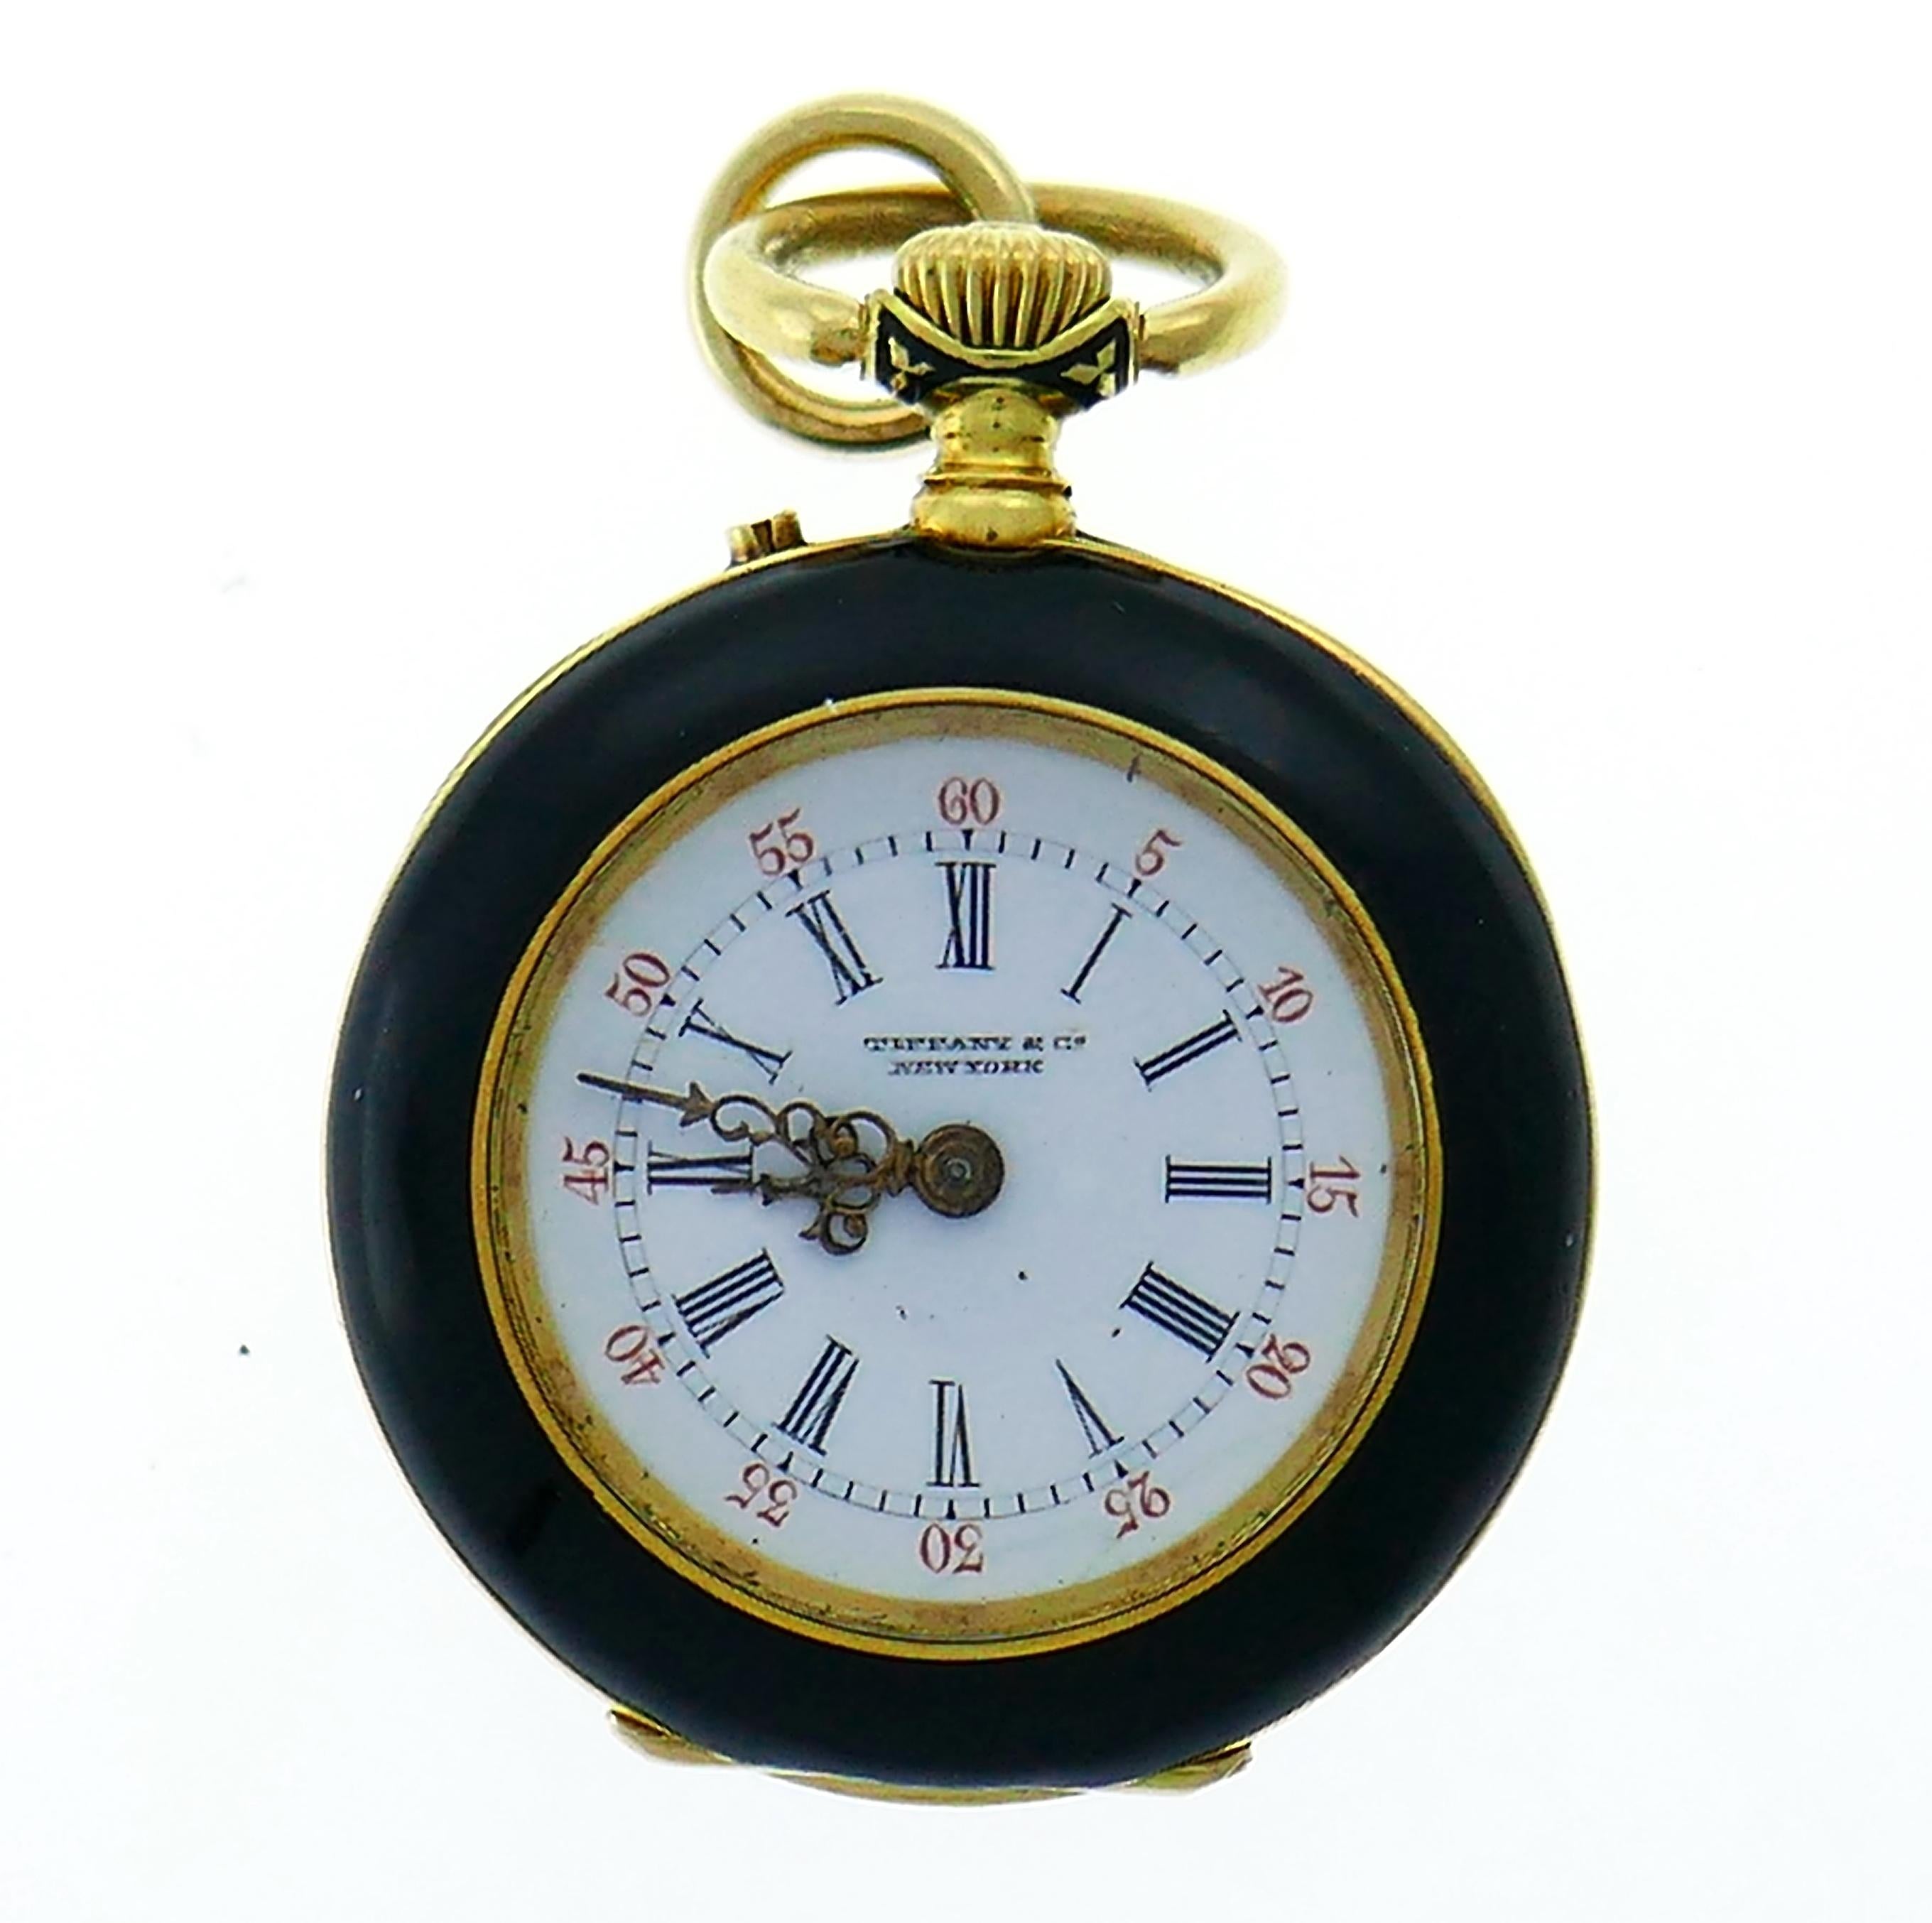 Rare Tiffany & Co. pocket watch that would be definitely a conversational piece. It was created in in the end of 1880s - beginning of 1890s. Made of 18 karat (stamped) yellow gold, black enamel and set with an approximately 1.20-carat round faceted